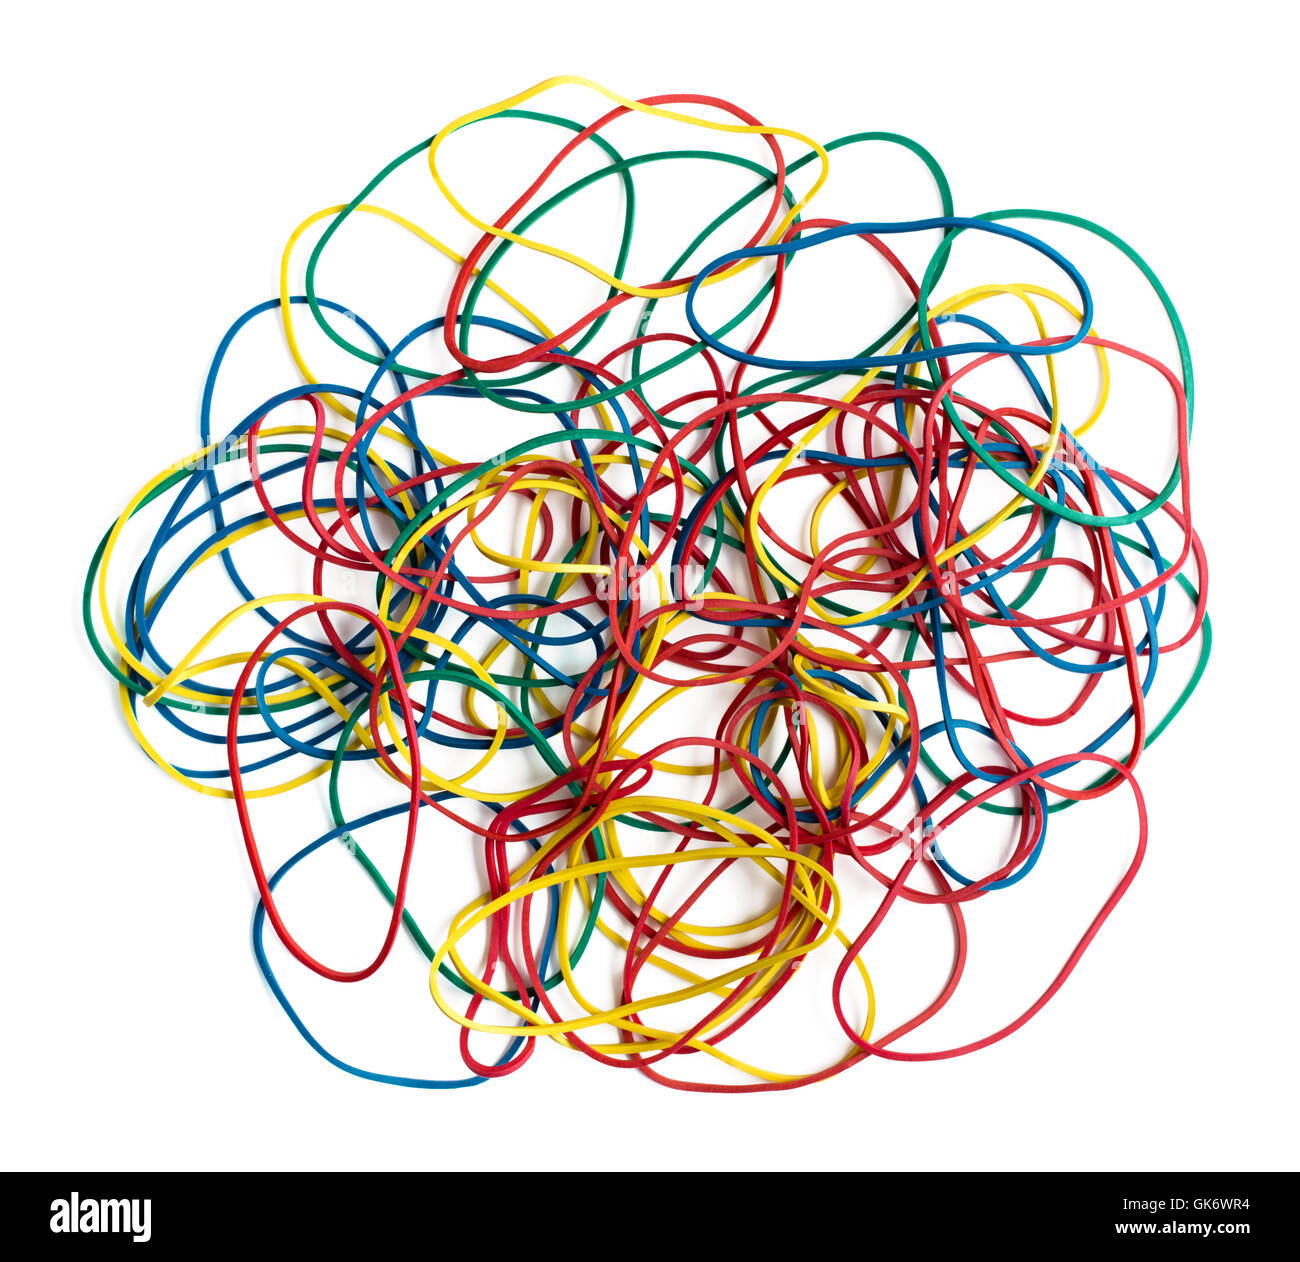 Colorful stationery rubber bands on white Stock Photo